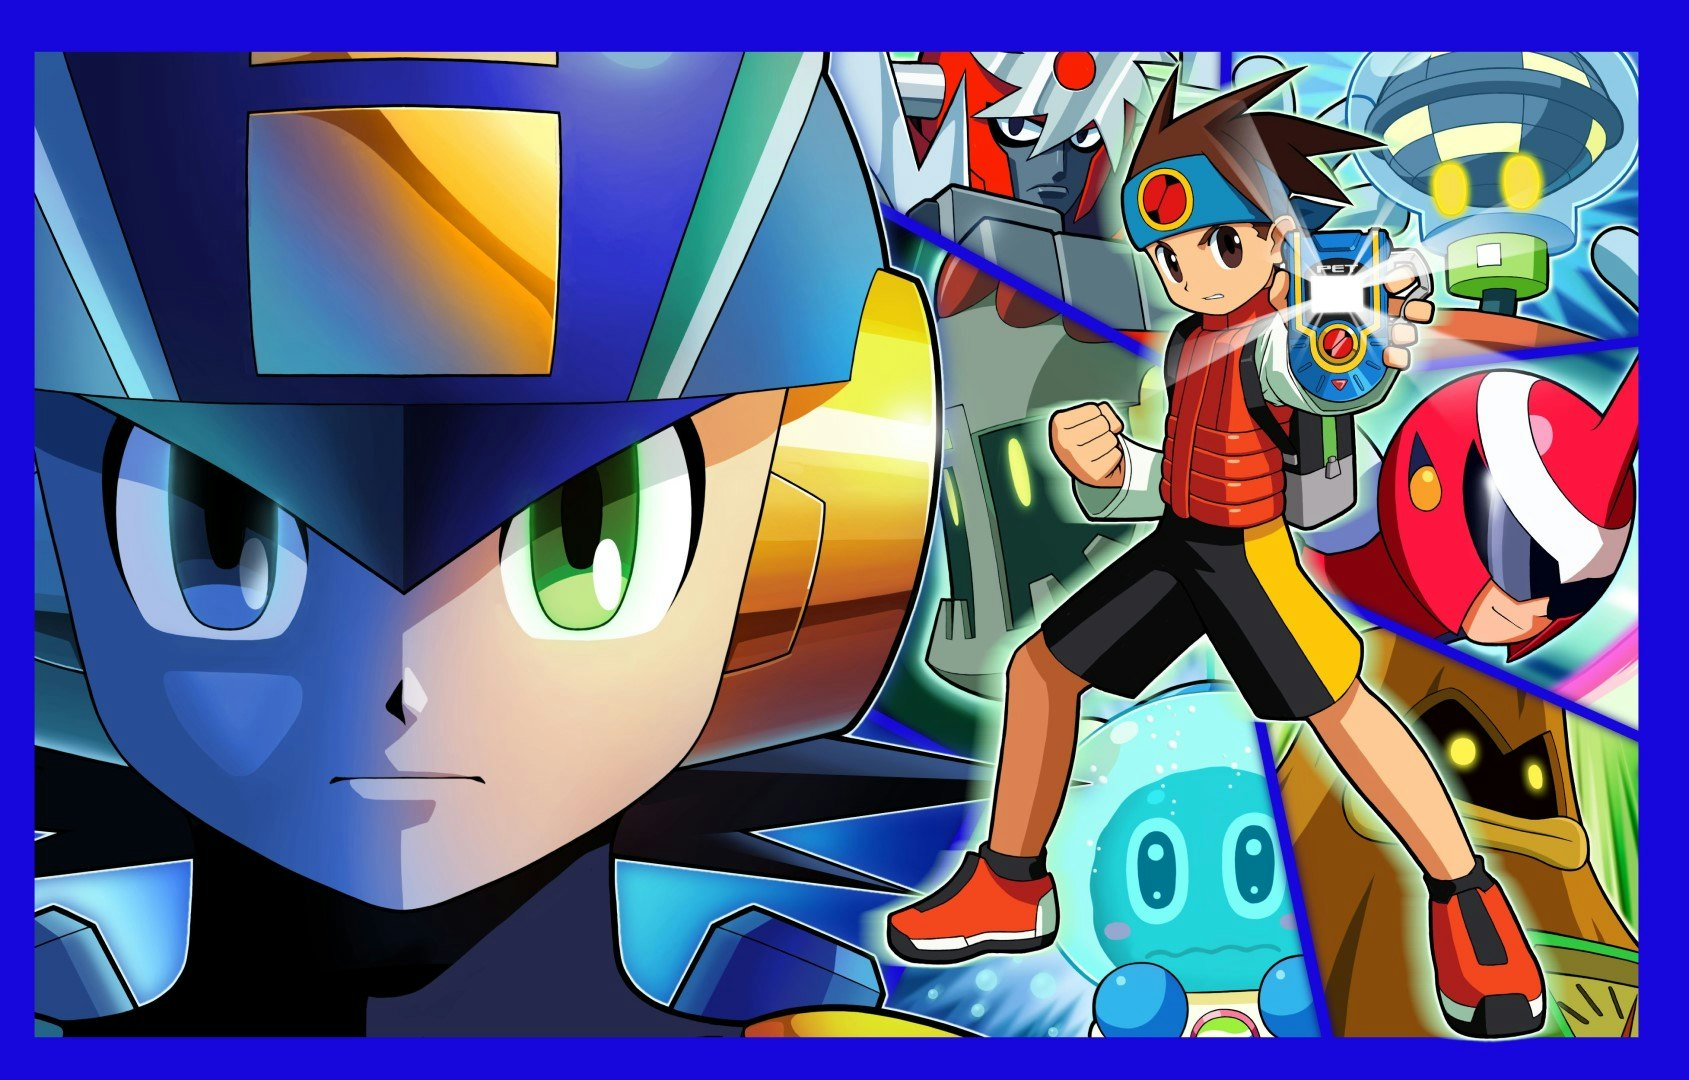 Hensama on Twitter NEW VIDEO SERIES Today I continue to look at  all the major changescensorship in MegaMan NT WarriorRockmanExe Part 2  out NOW MEGAMAN CAPCOM MegaManBattleNetwork megamanntwarrior roll  anime manga httpstco 